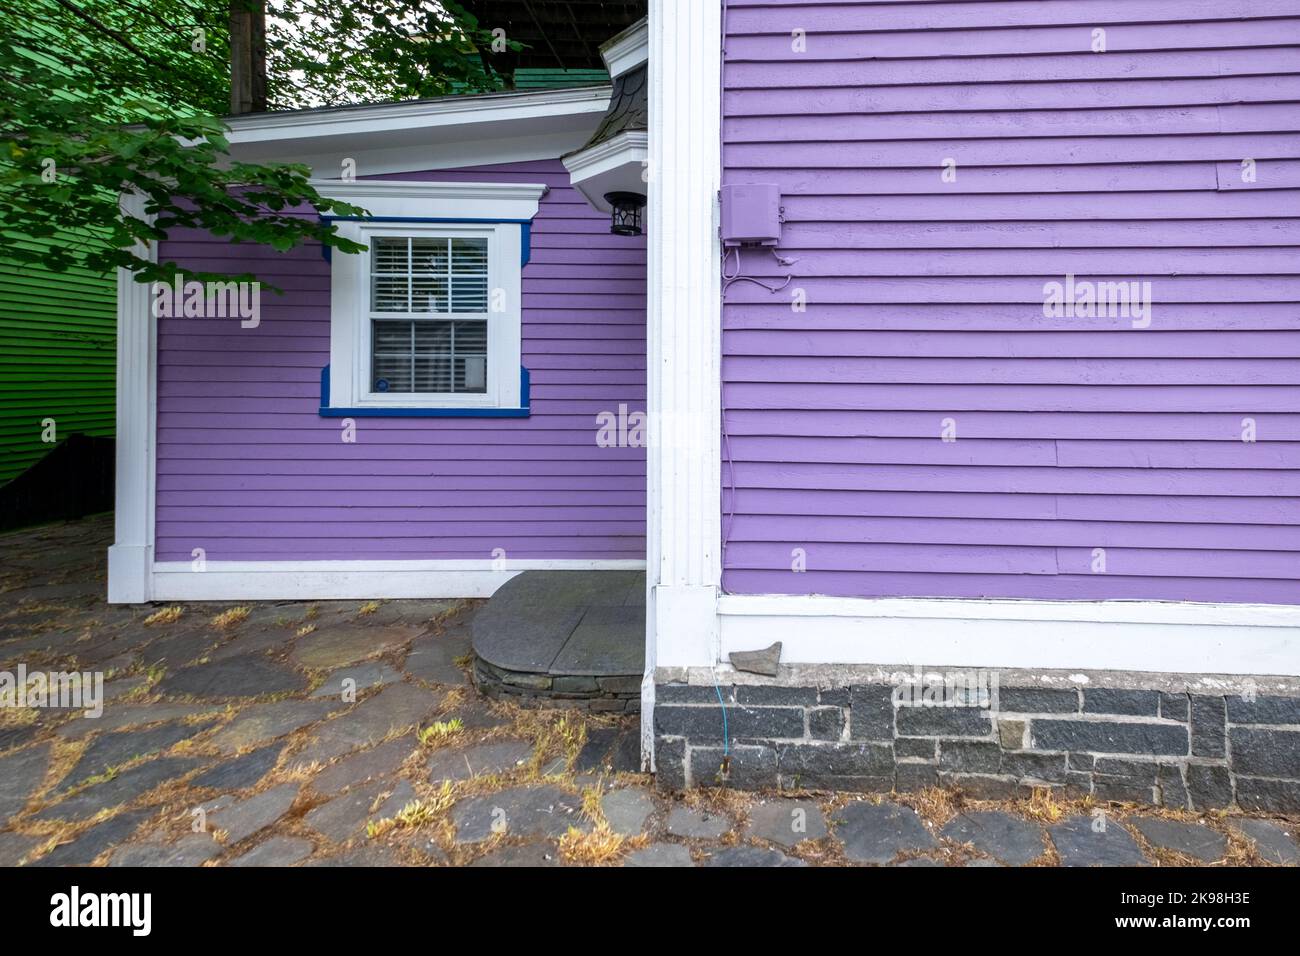 The exterior of a vibrant purple colored wooden wall covered in horizontal clapboard siding. The building has white trim with thin blue lines. Stock Photo